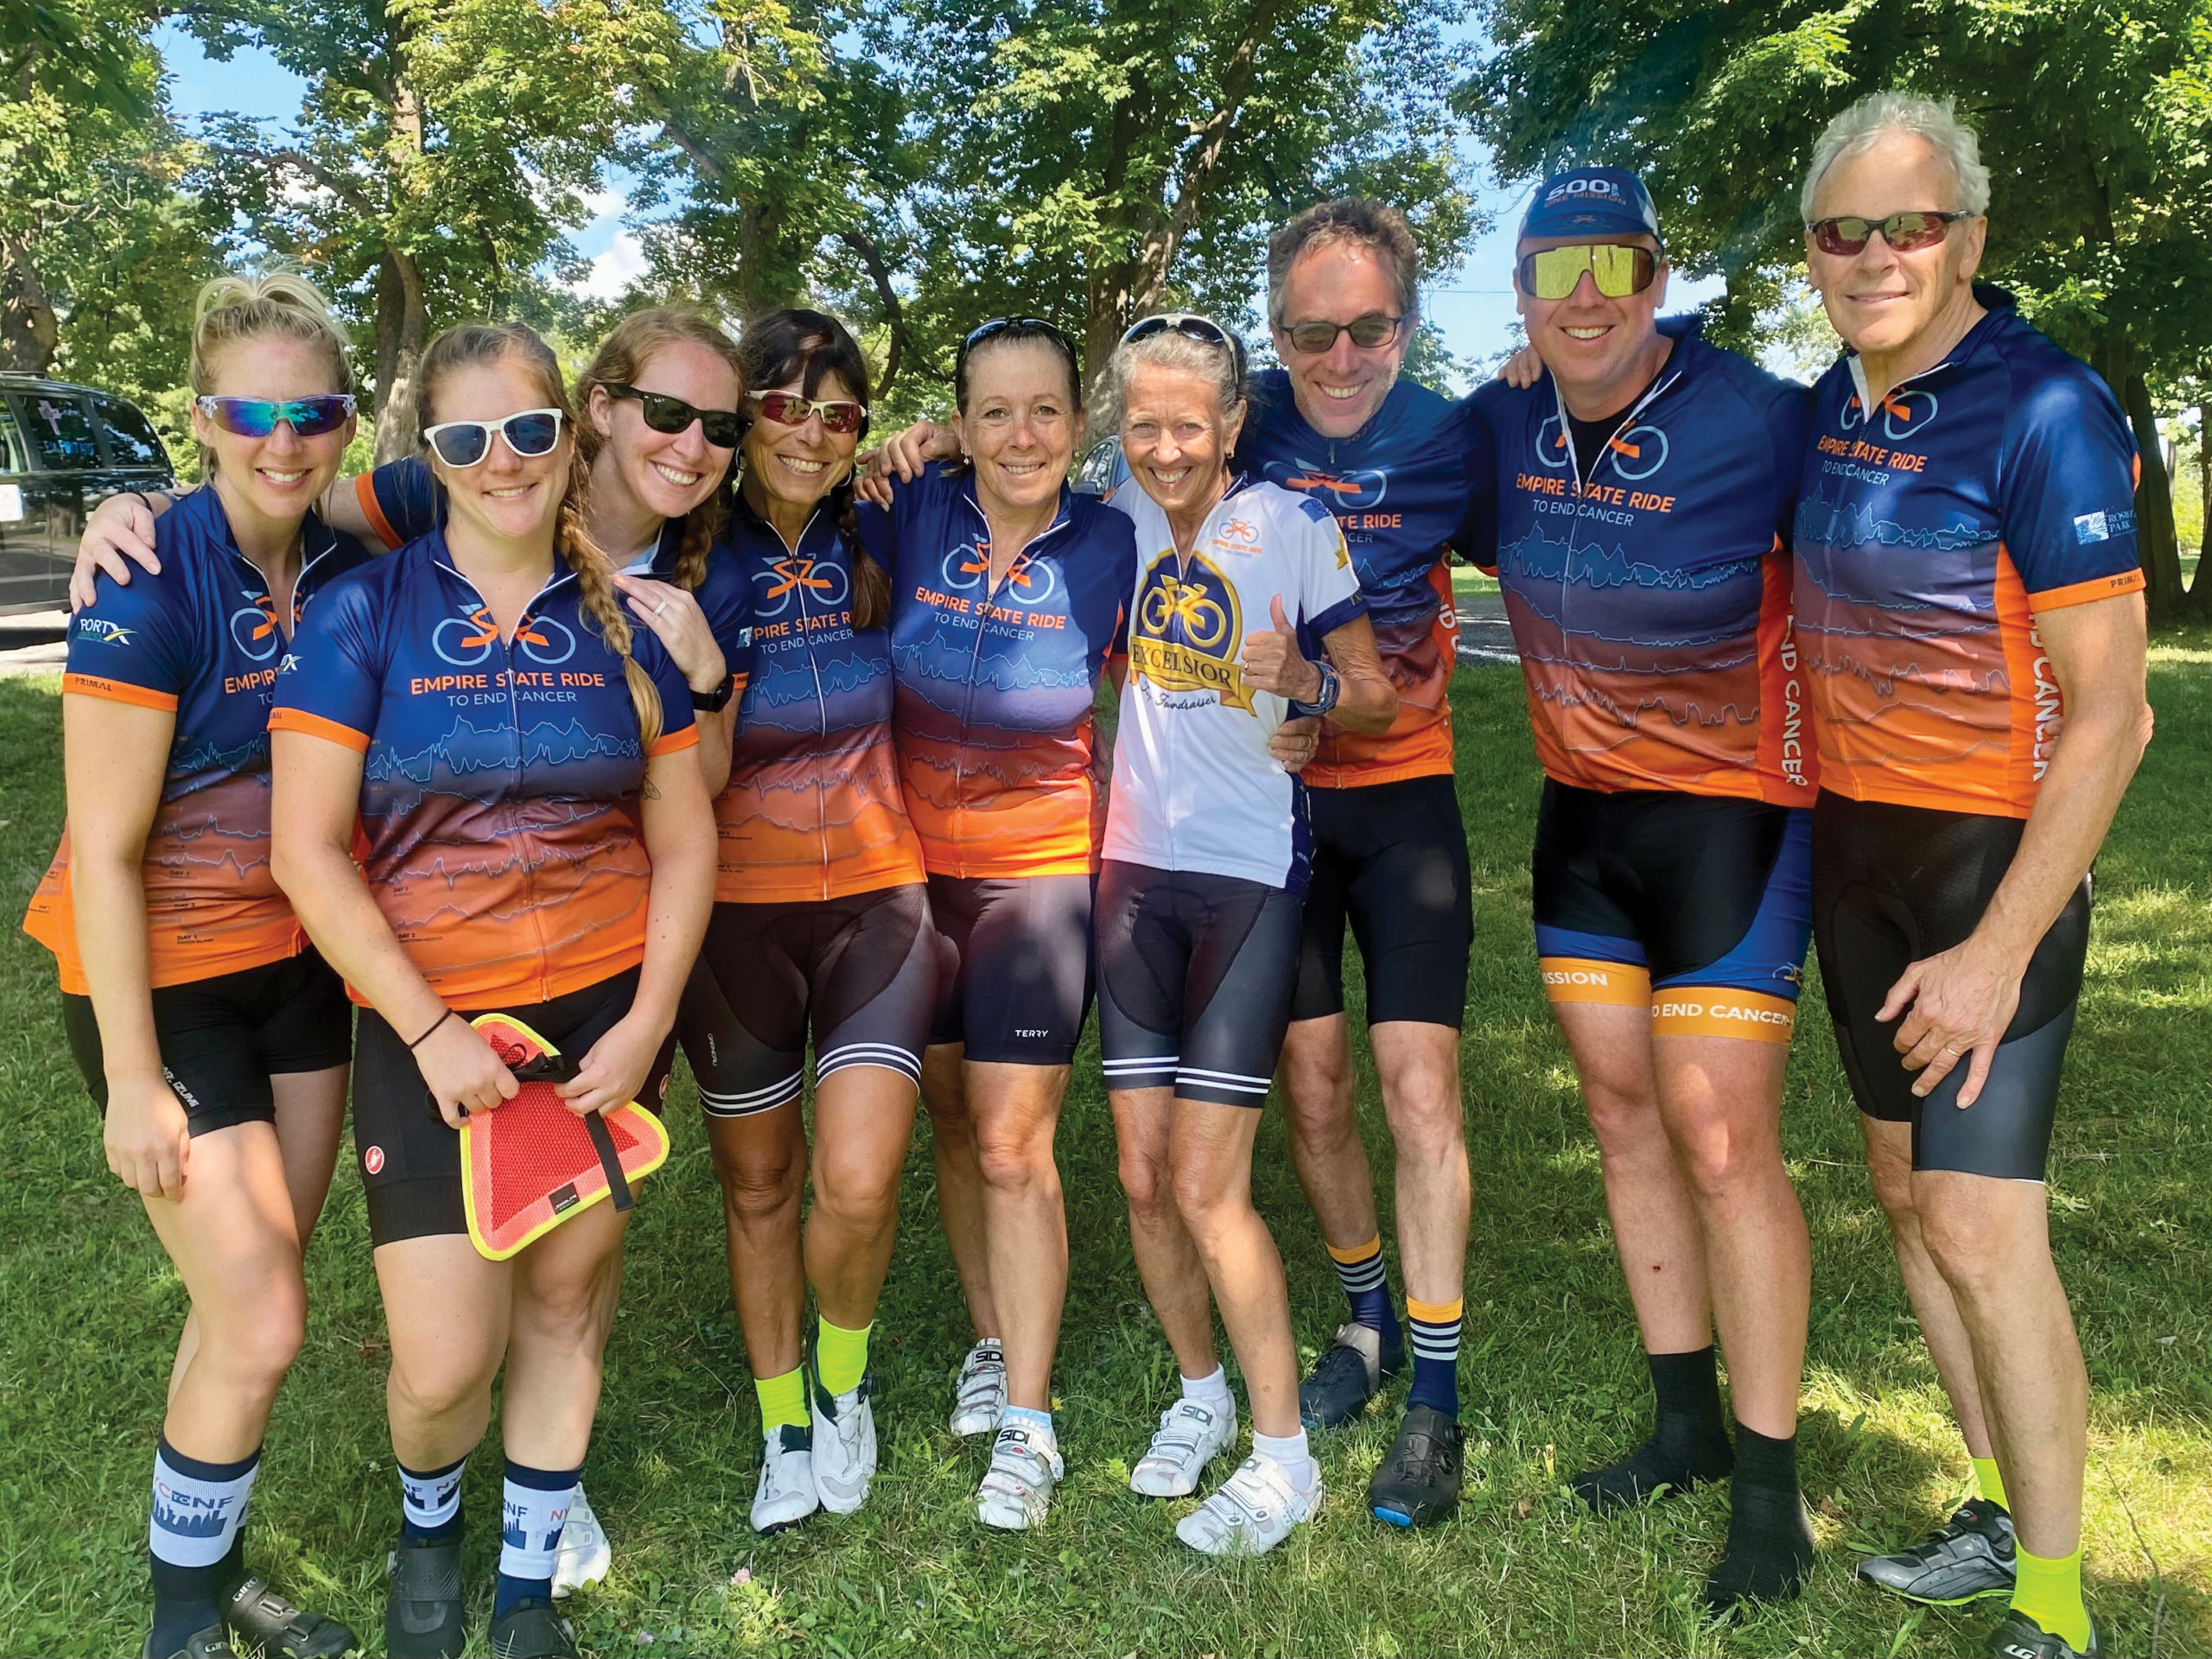 Empire State Ride for Roswell Team Holiday Valley Enjoys Helping a